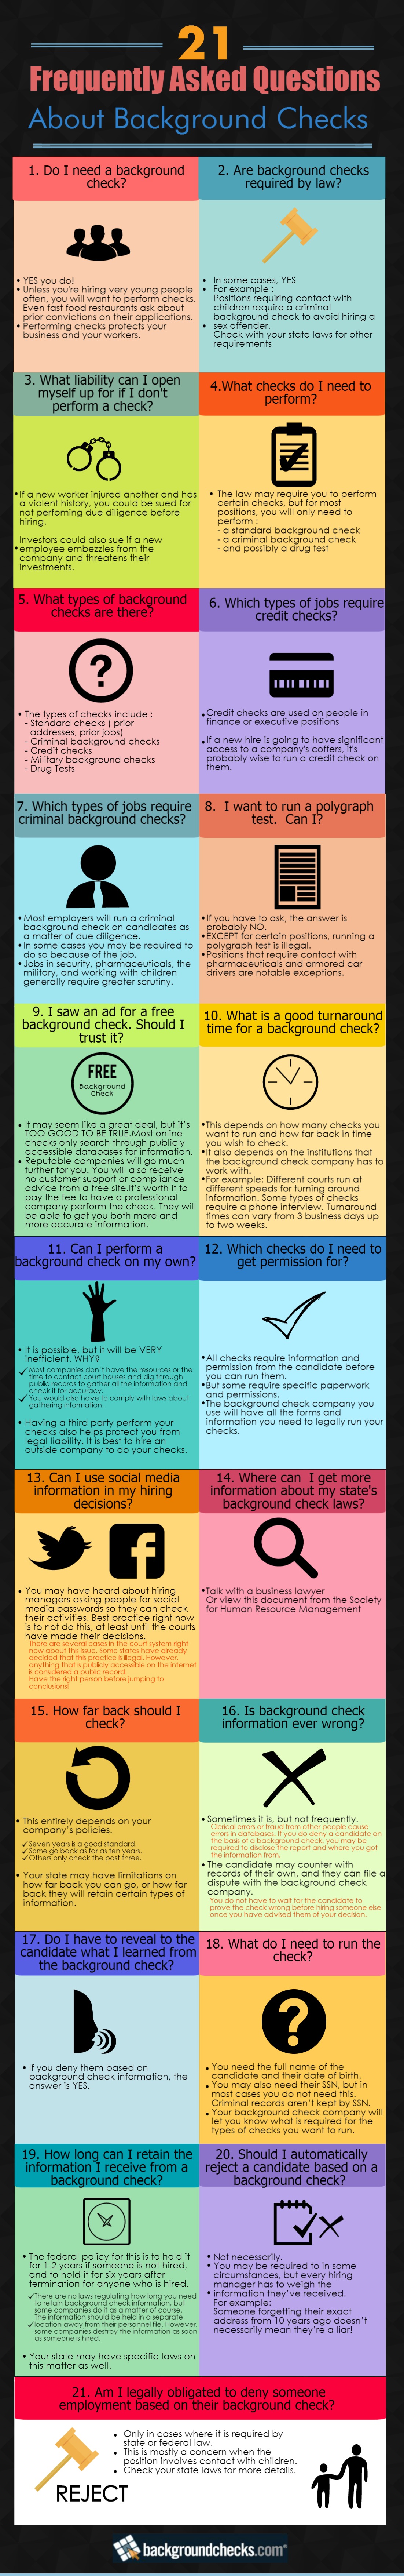 Background-Check-Infographic-Q&A